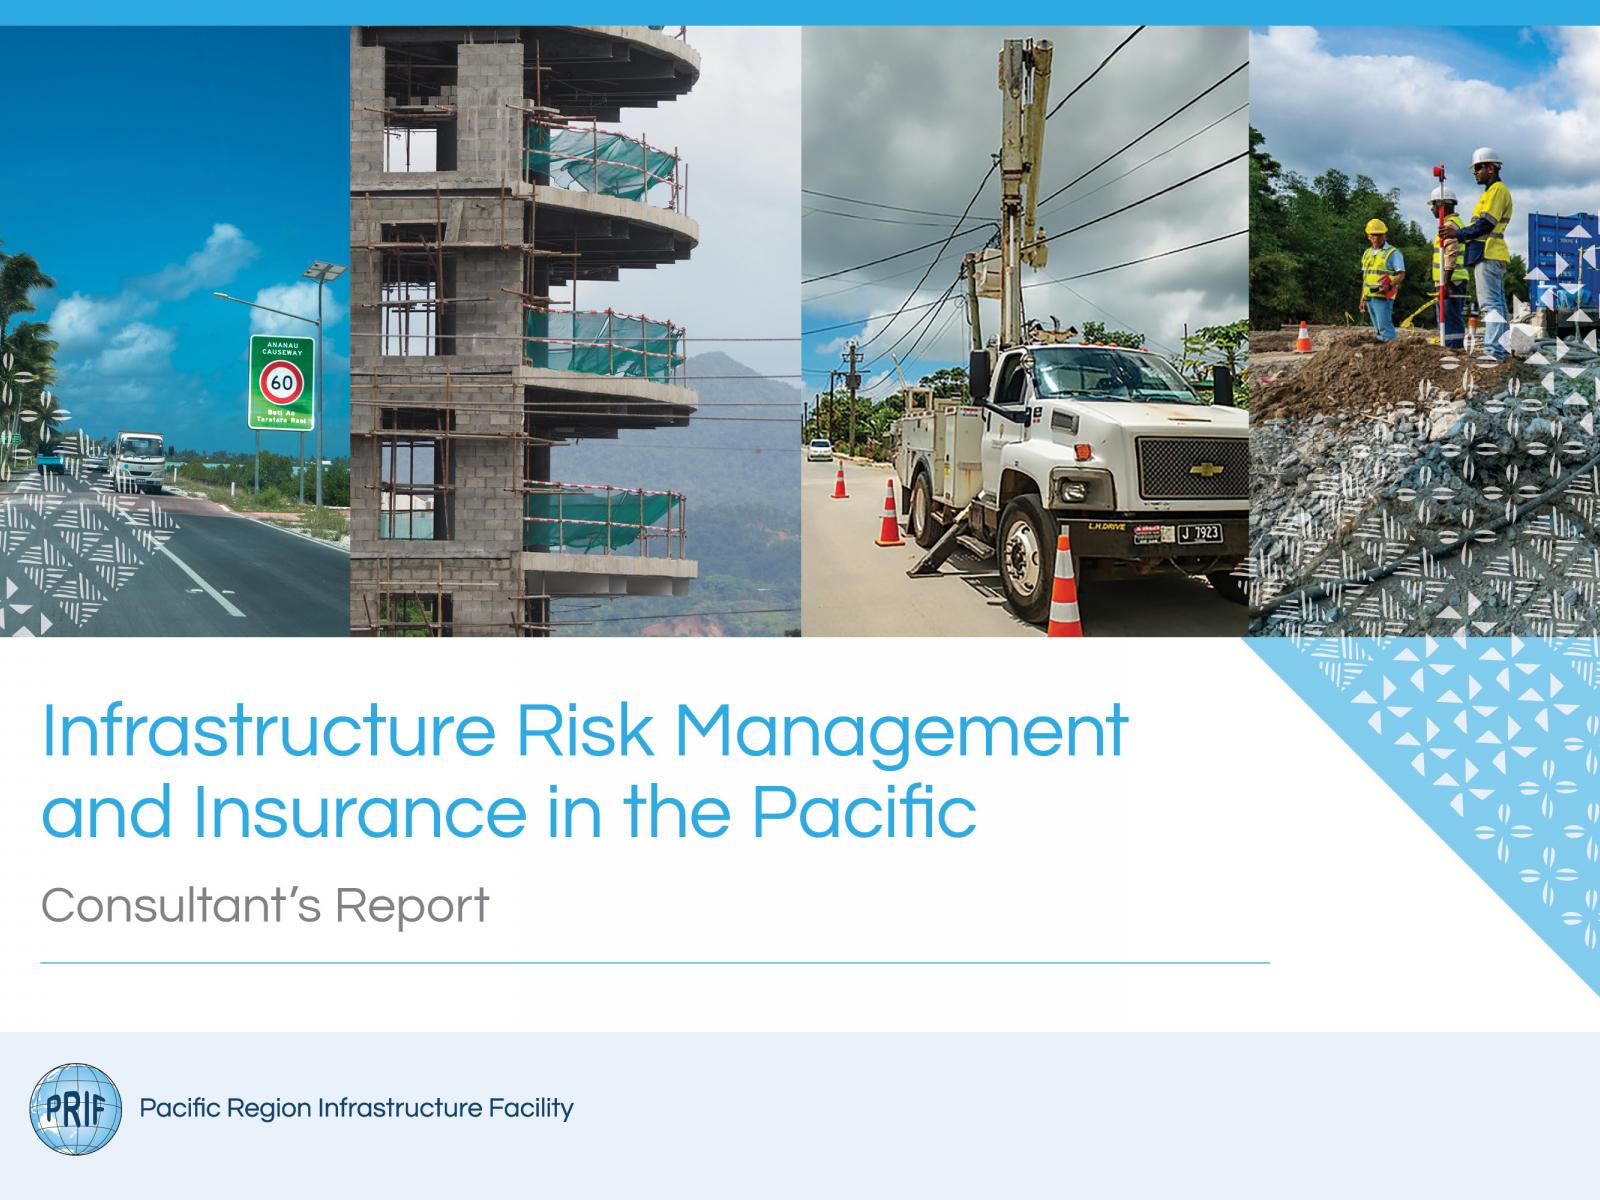 Infrastructure Insurance in the Pacific